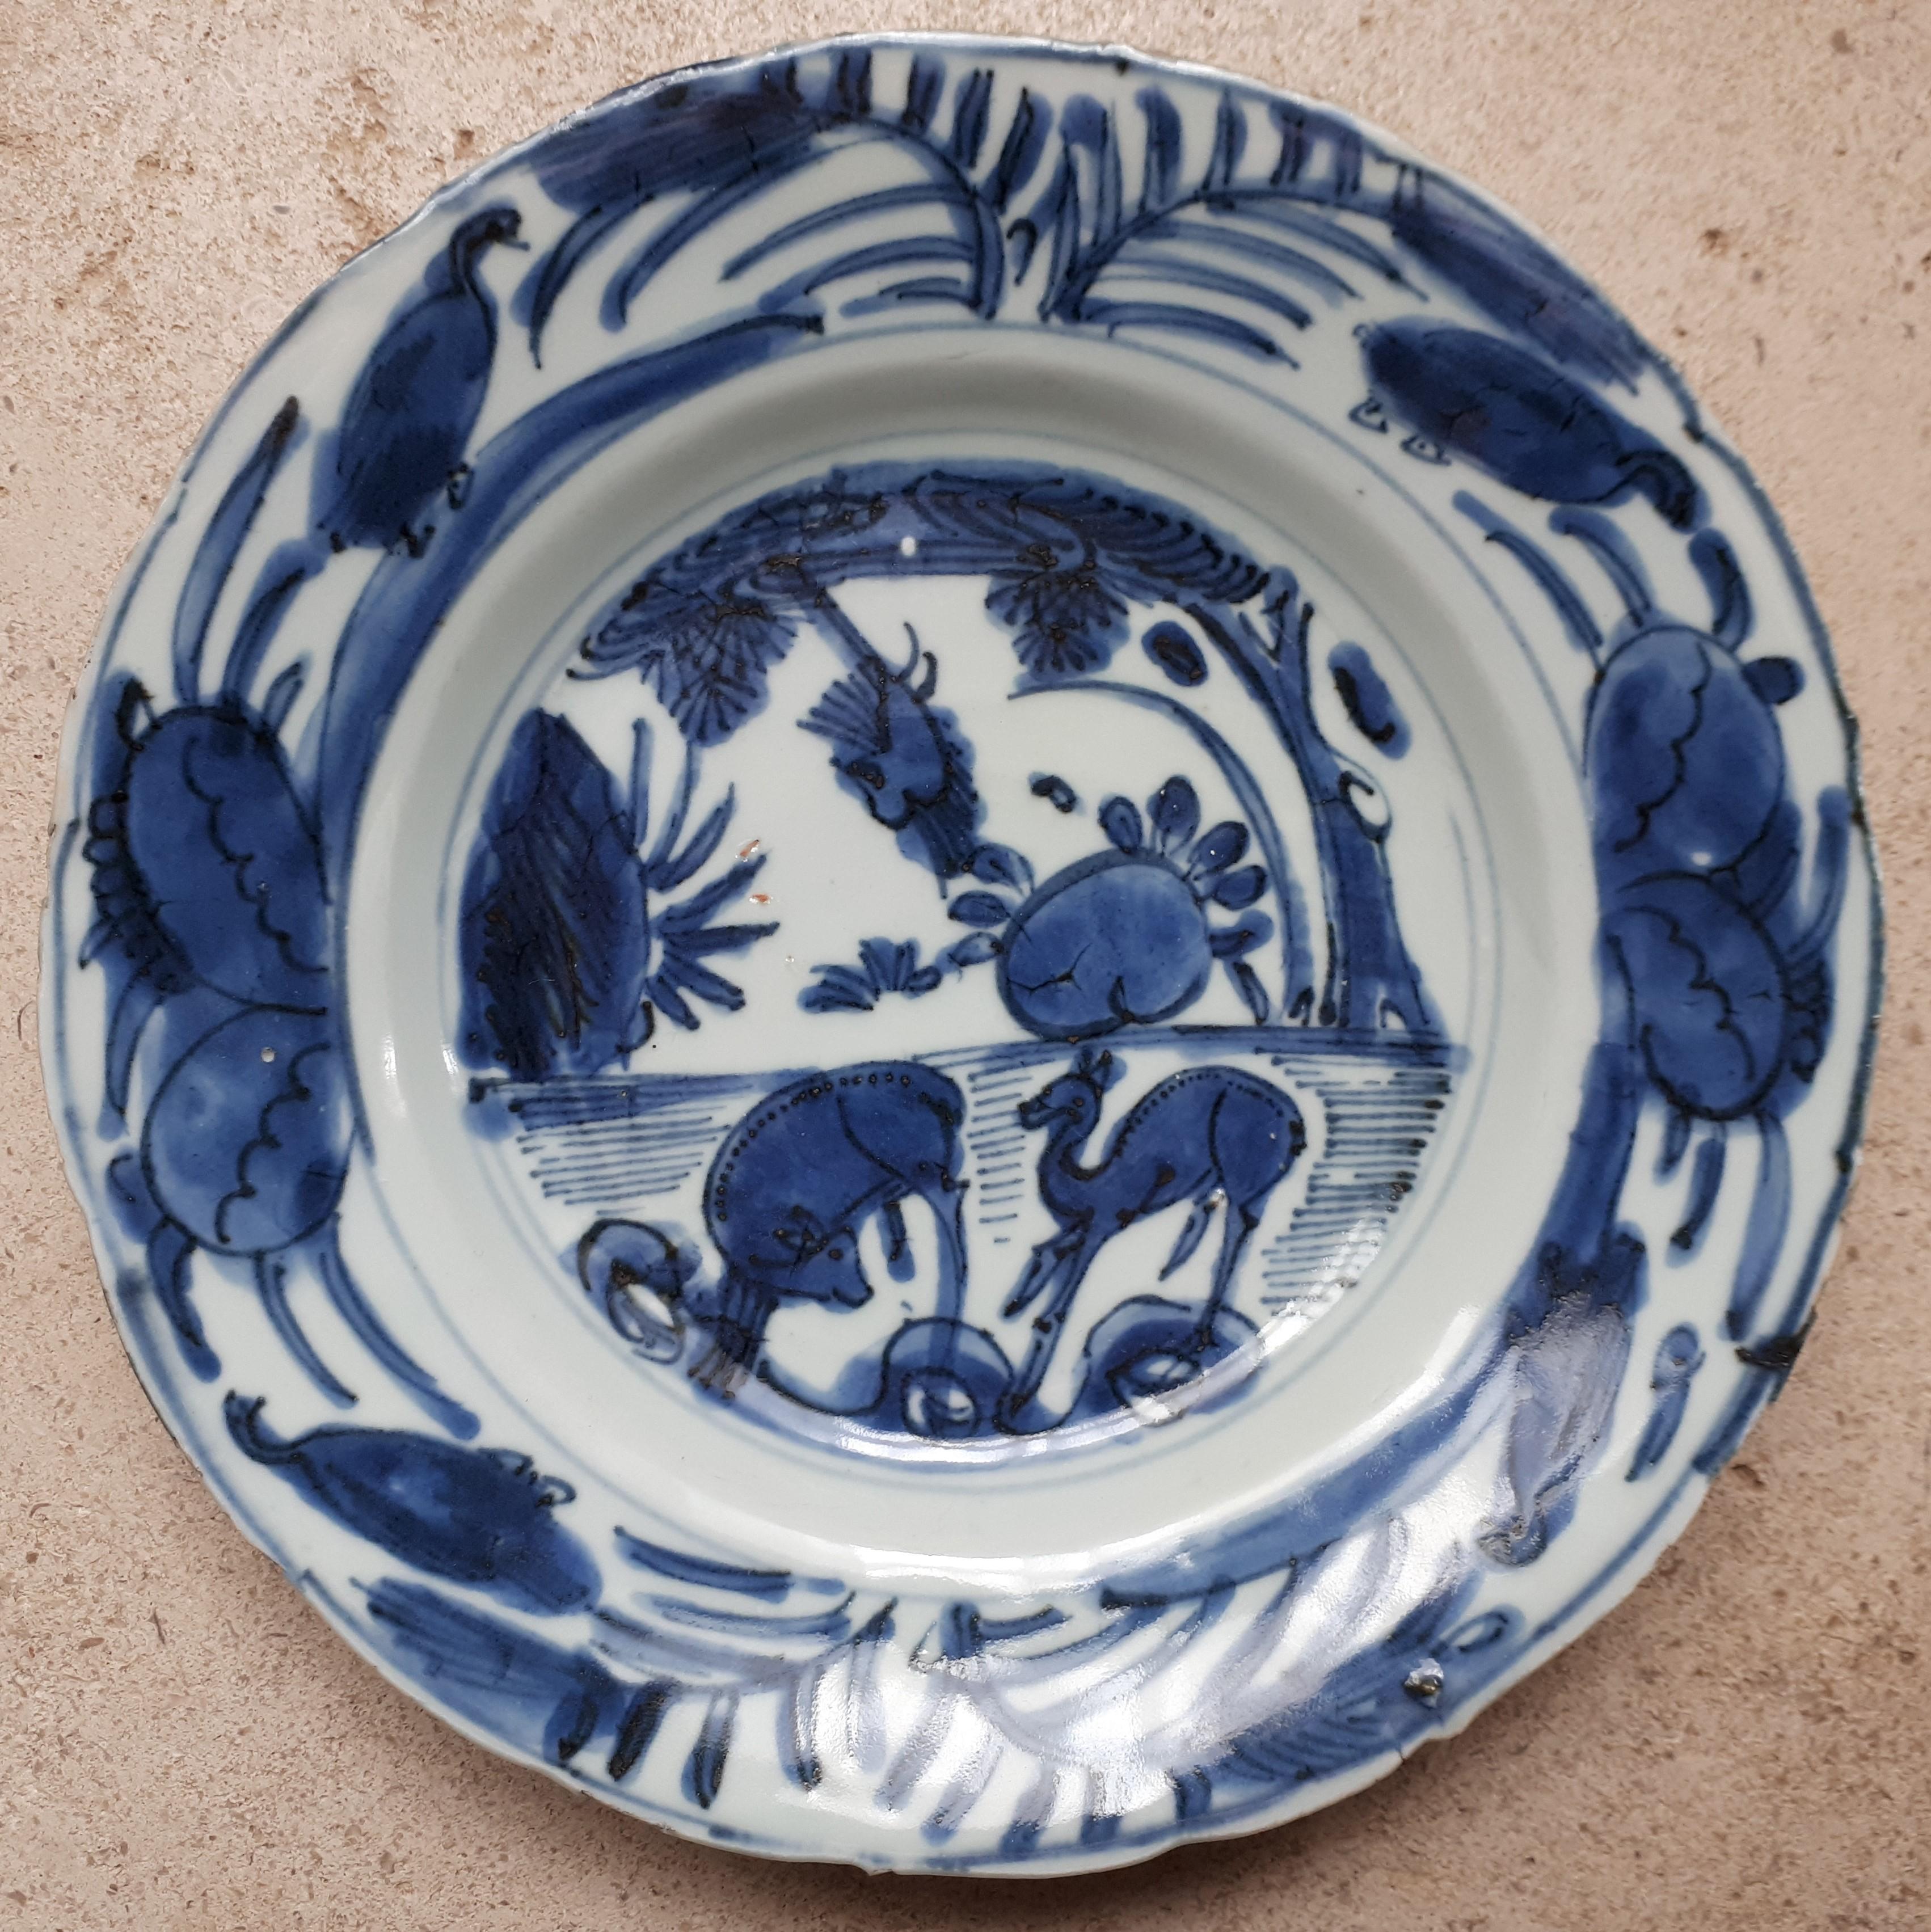 Slightly lobed dish with flared rim with blue decoration under cover of two deers. Tiny chips on the border (usual for porcelain from this period), otherwise perfect condition !
China, mid-16th century.